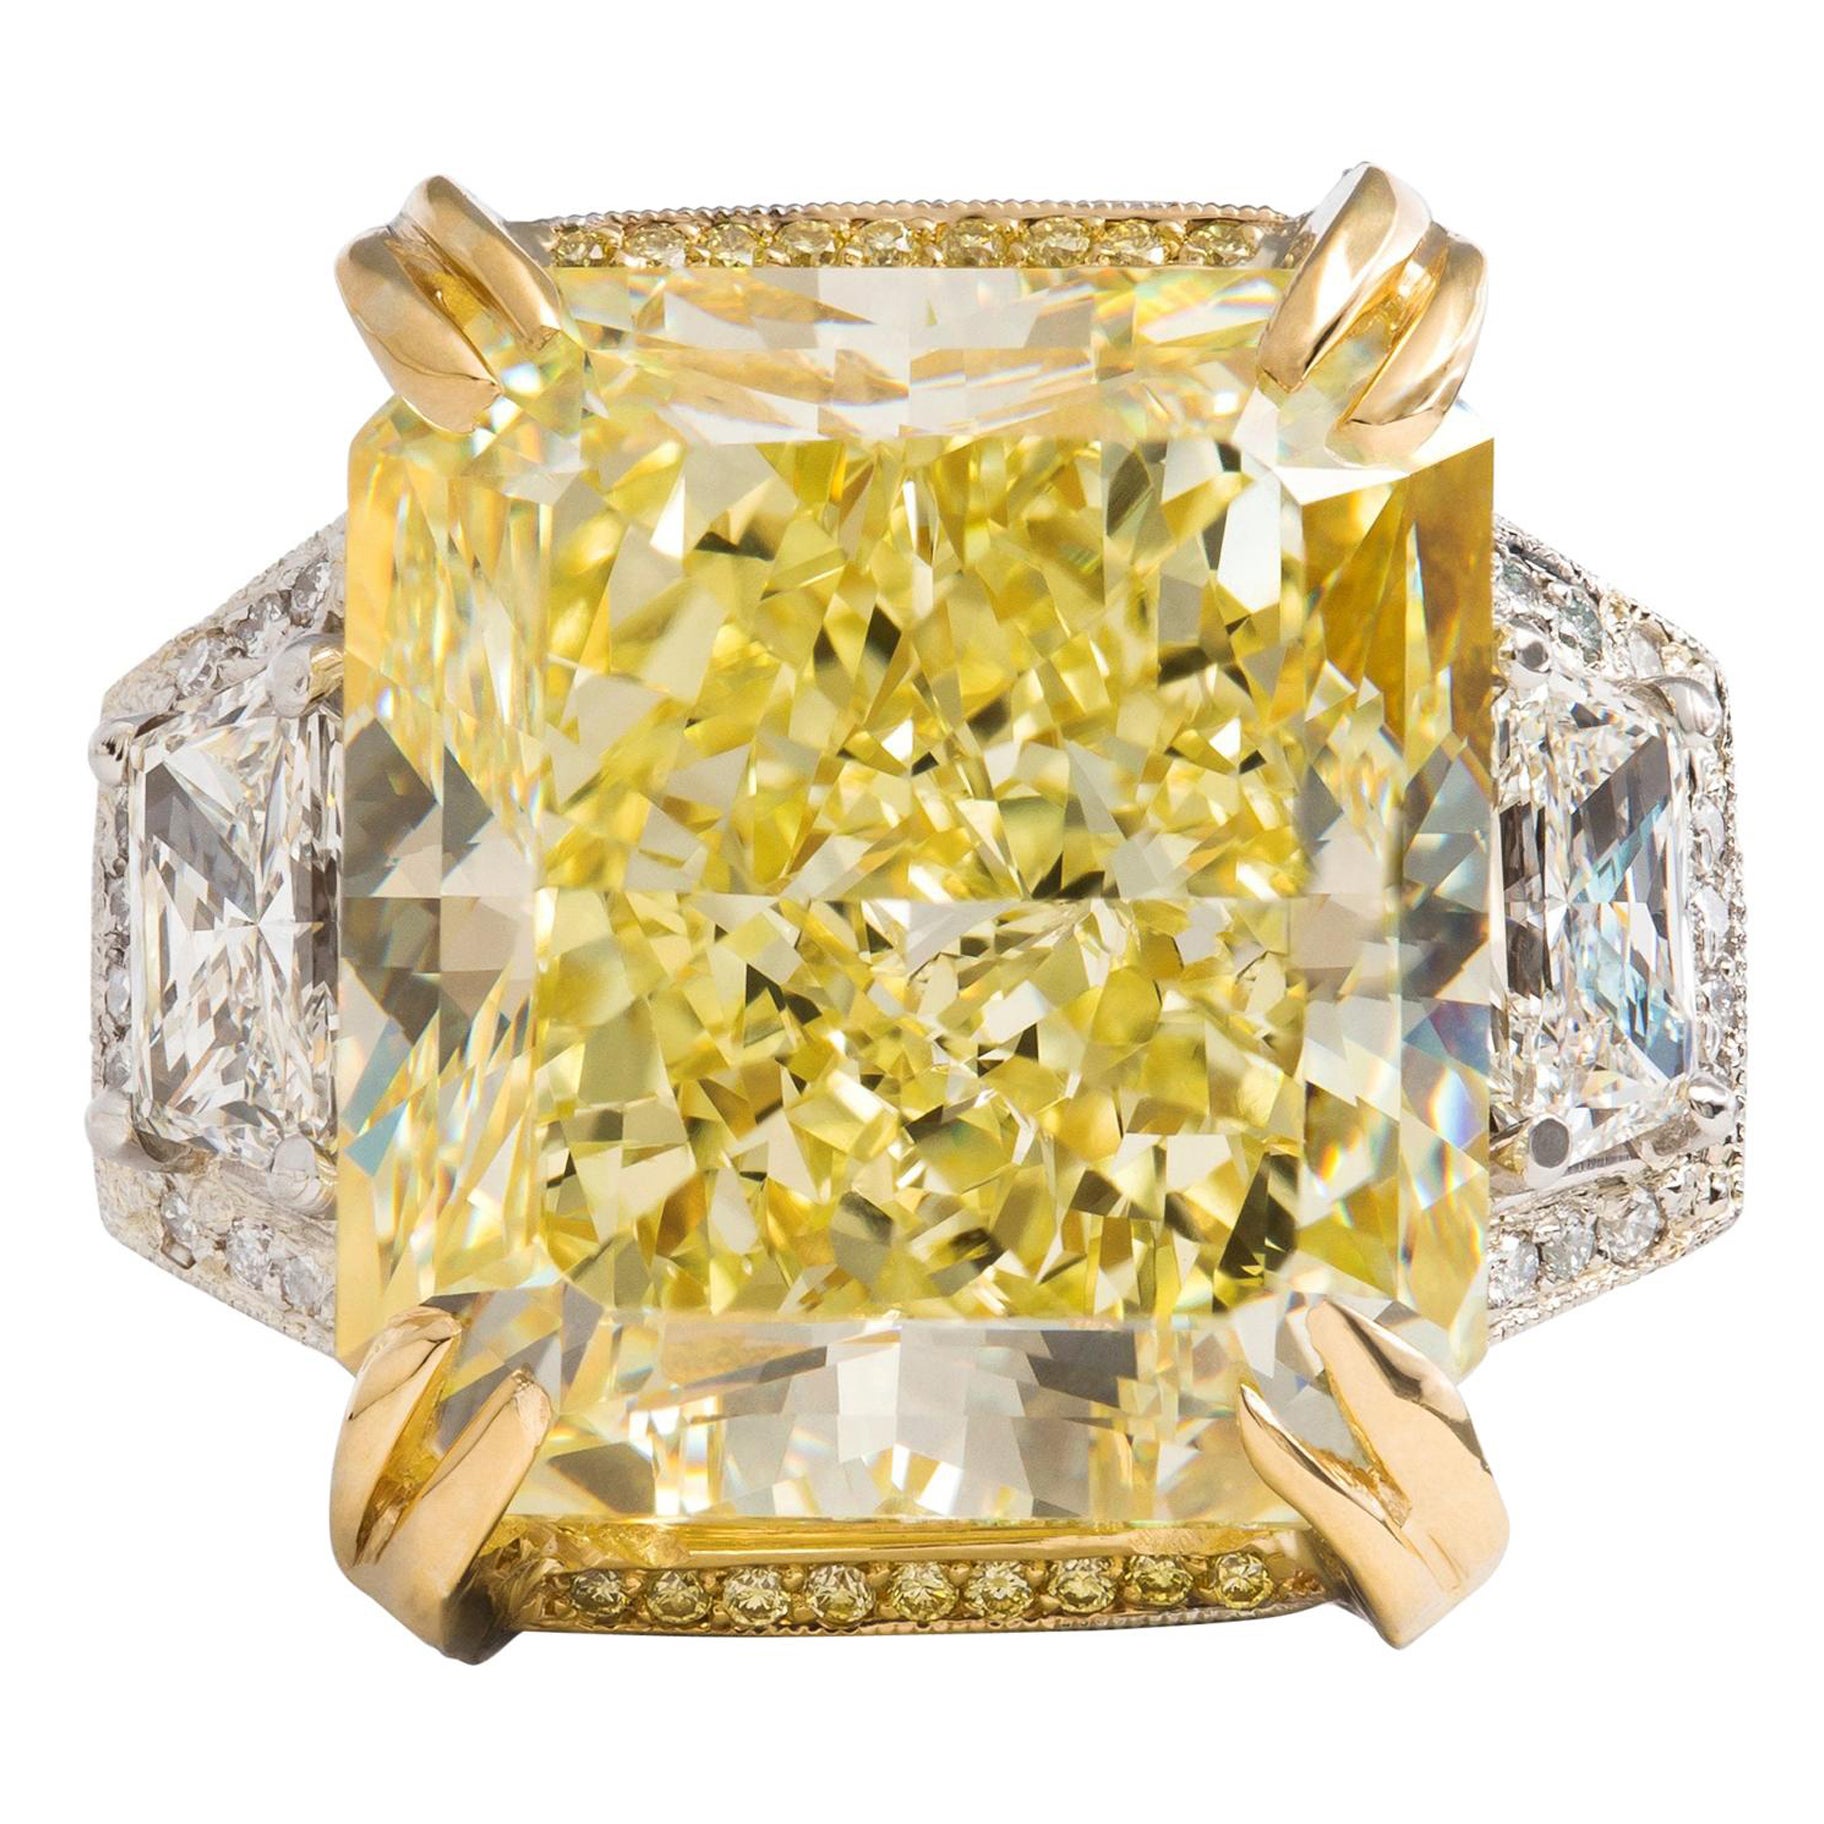 Michael Beaudry GIA Certified 21.57 Carat Fancy Yellow Diamond Ring in Platinum For Sale